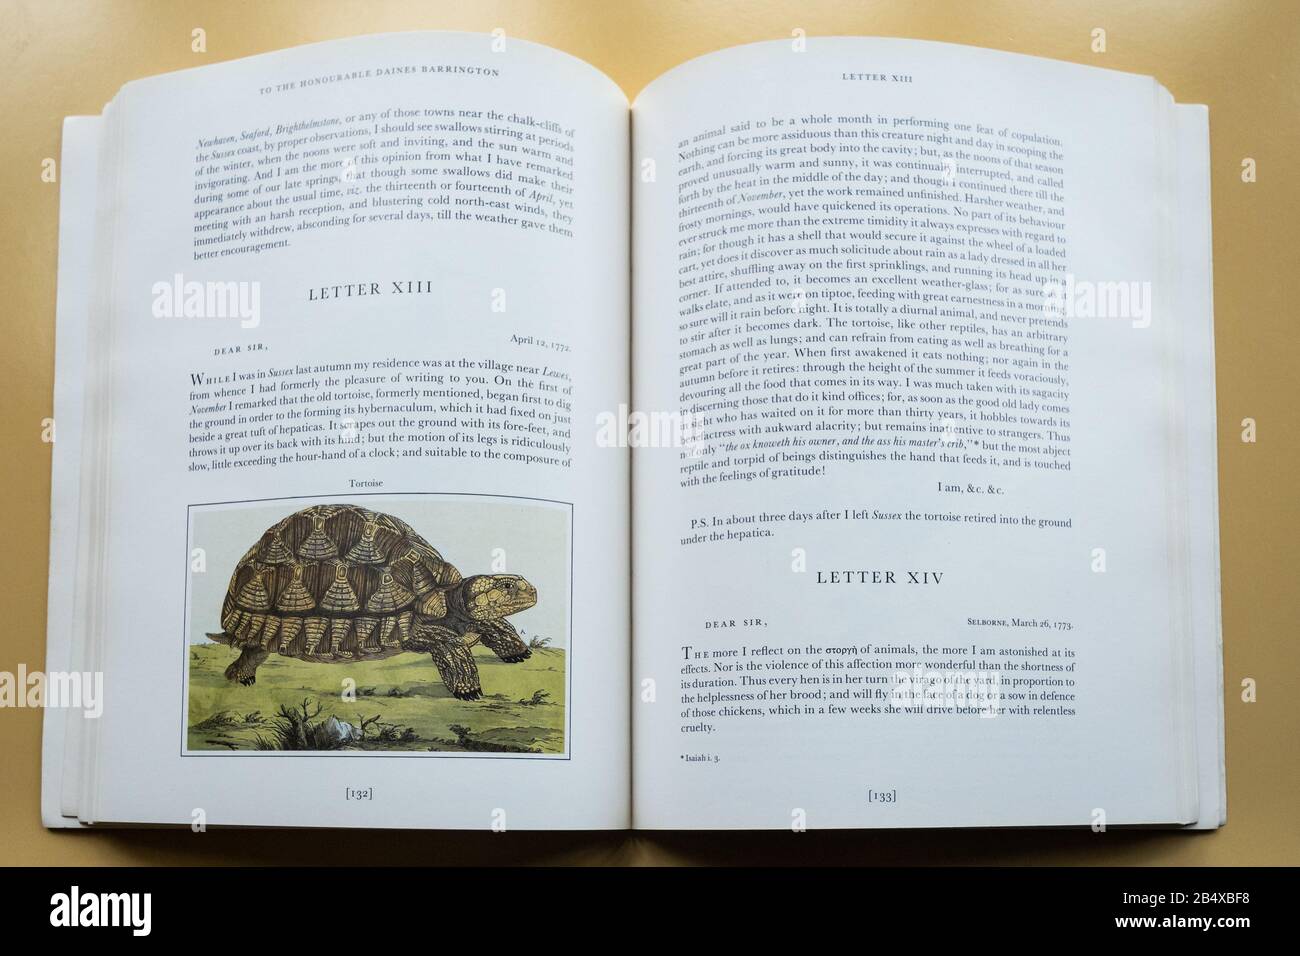 The Illustrated Natural History of Selborne, a famous book by 18th century British naturalist Gilbert White, opened showing drawing of a tortoise Stock Photo